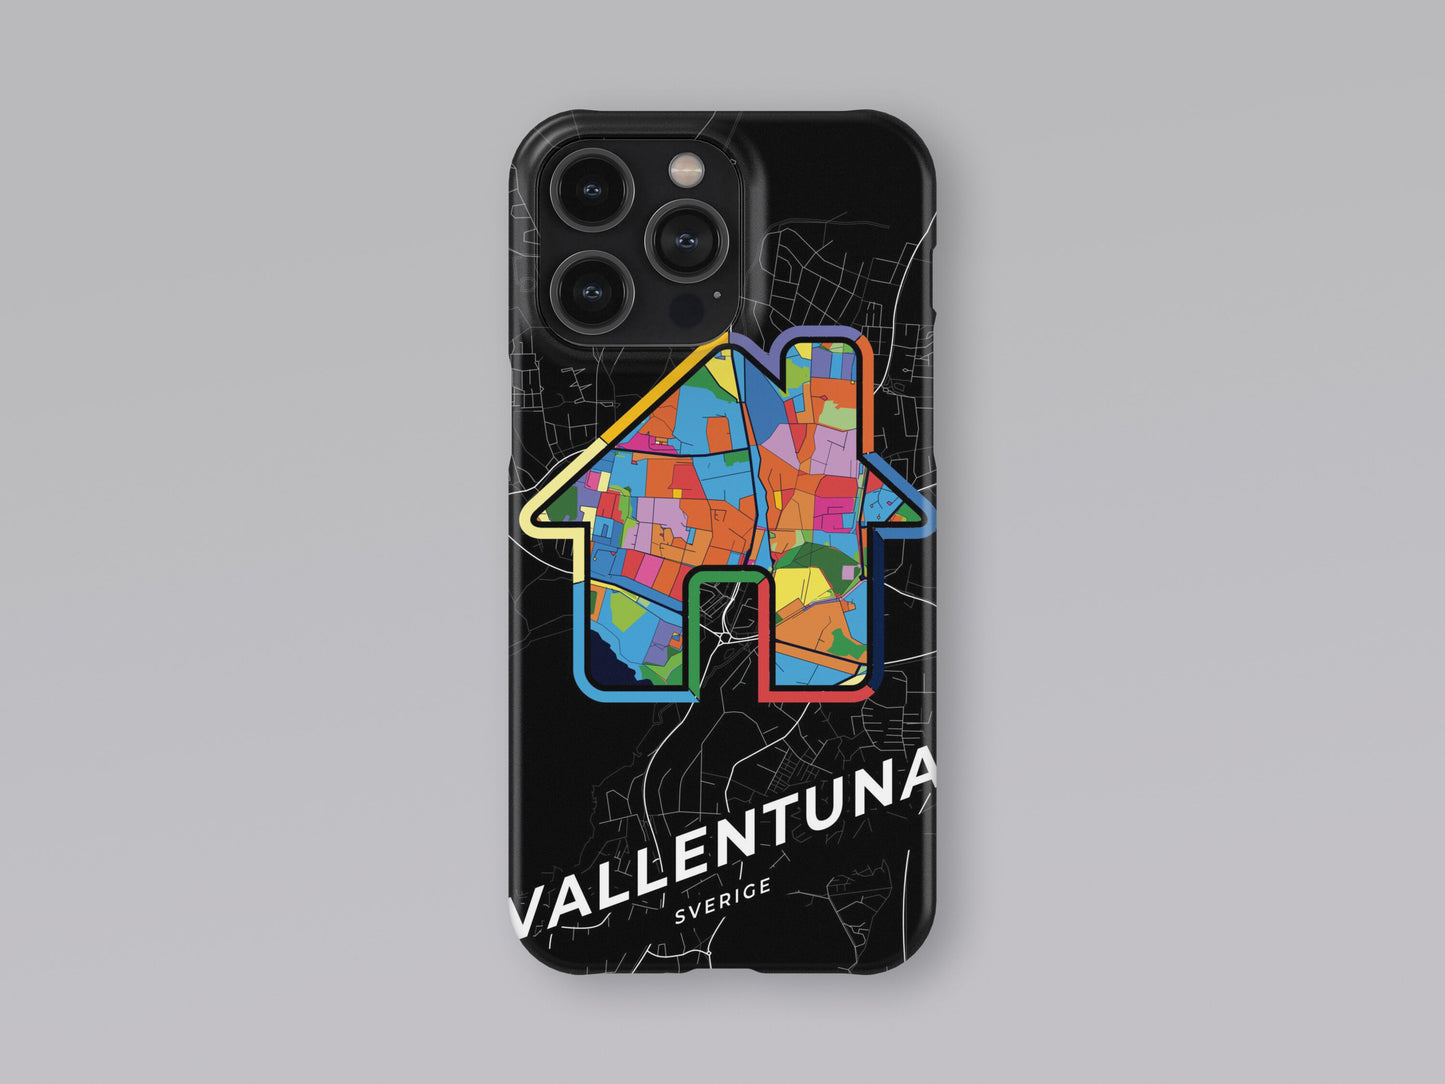 Vallentuna Sweden slim phone case with colorful icon 3